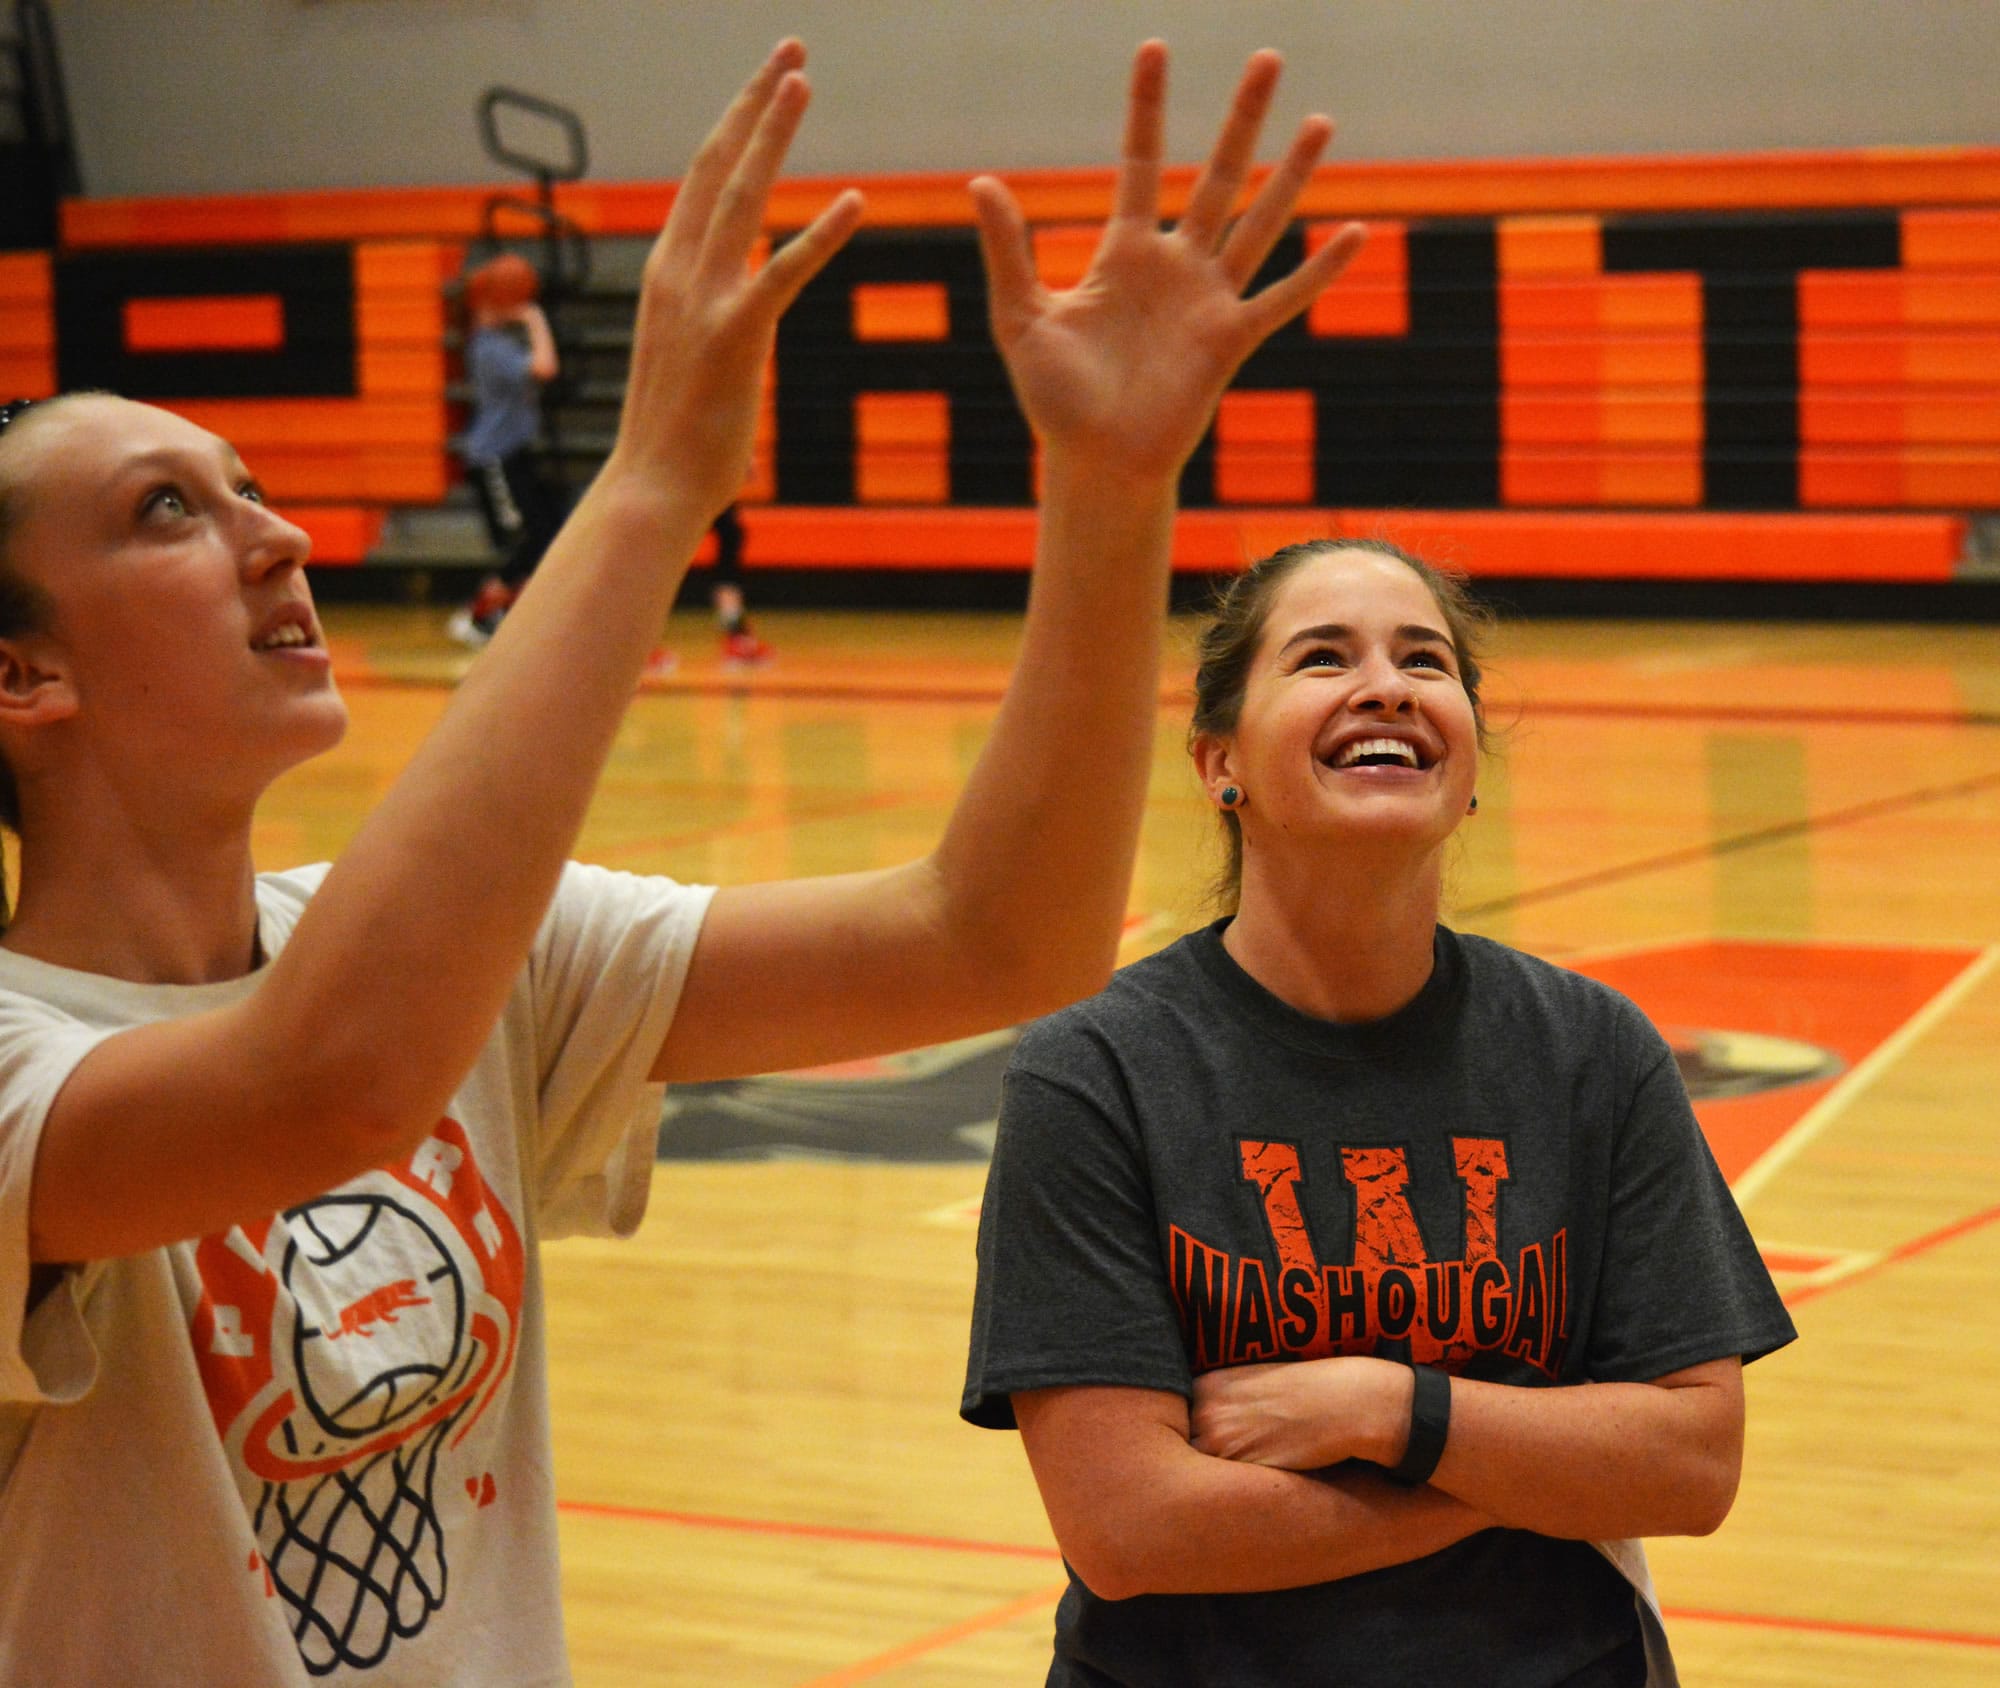 Britney Knotts brings enthusiasum to the gym as the new head girls basketball coach at Washougal High School. The 29-year-old played the game for Mountain View High School, Chemeketa Community College and Evergreen State College.